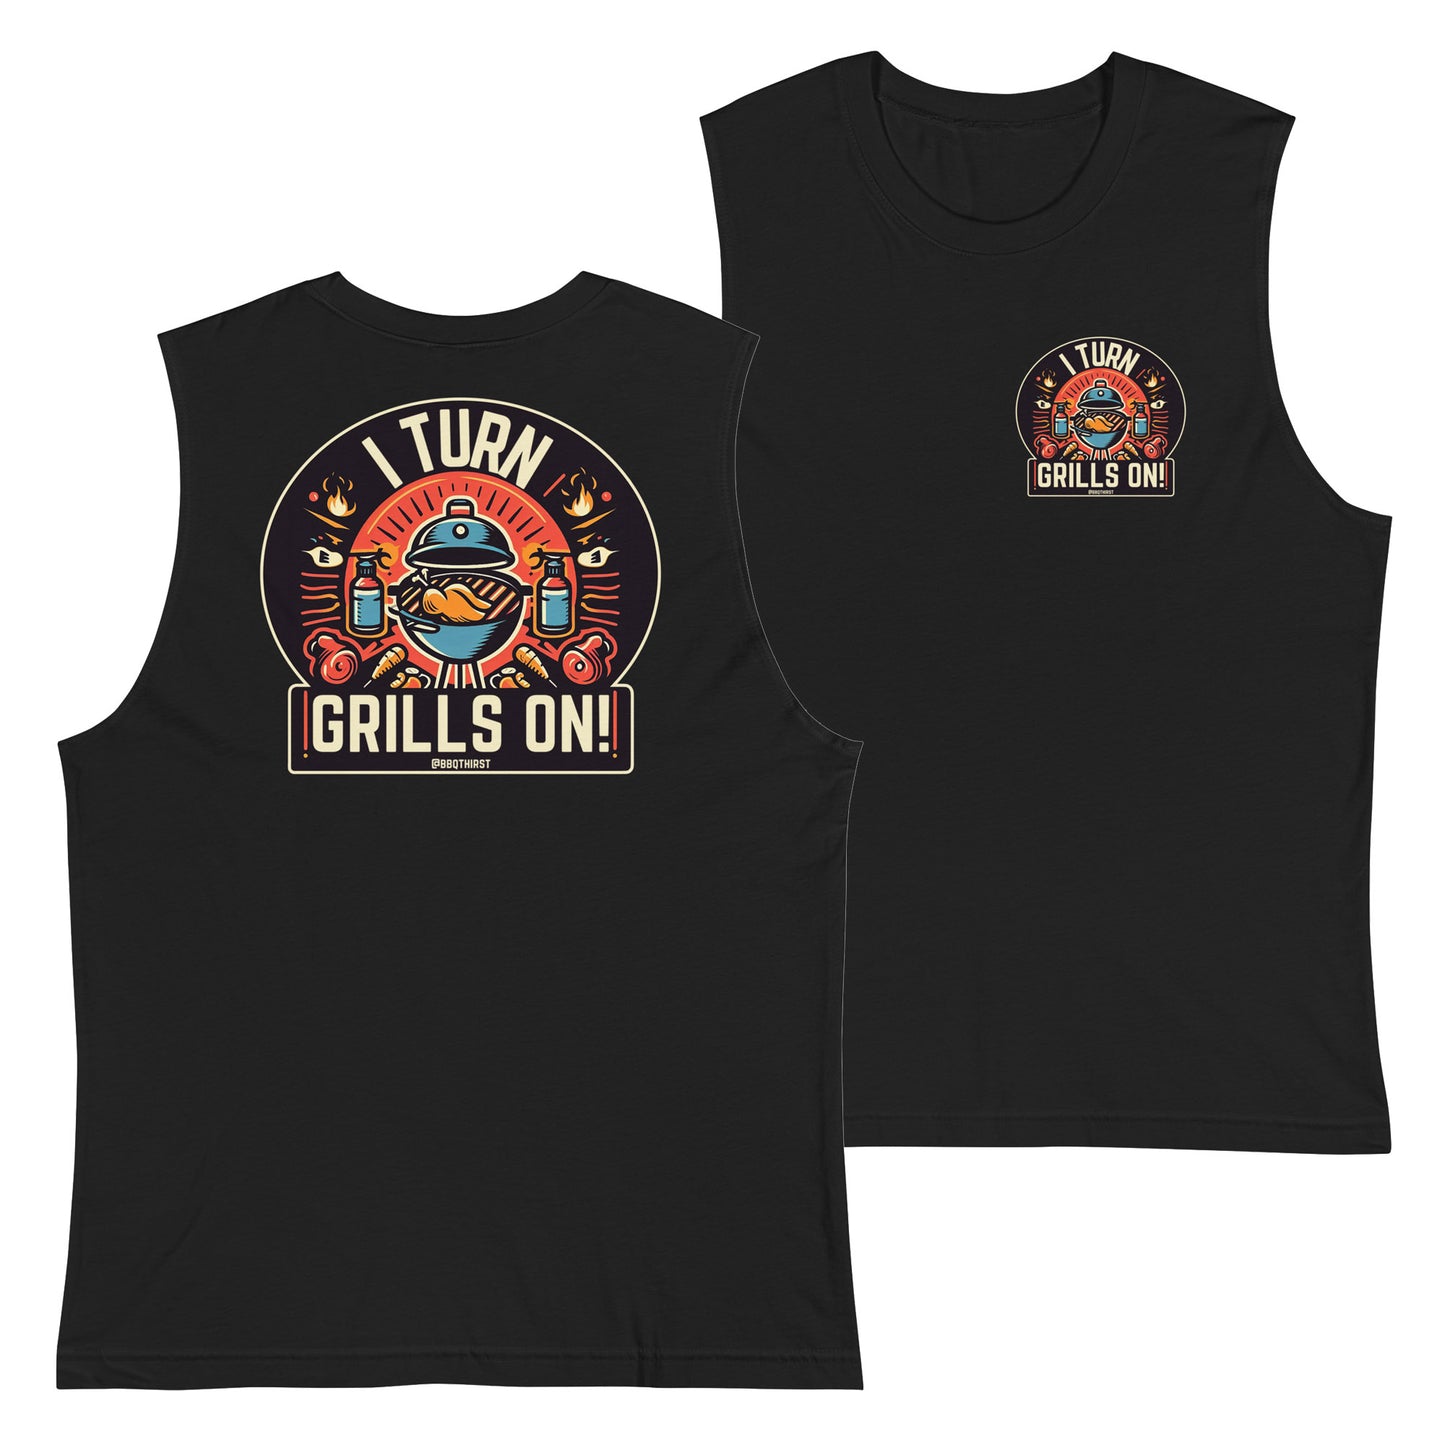 Grills On! Muscle Tee